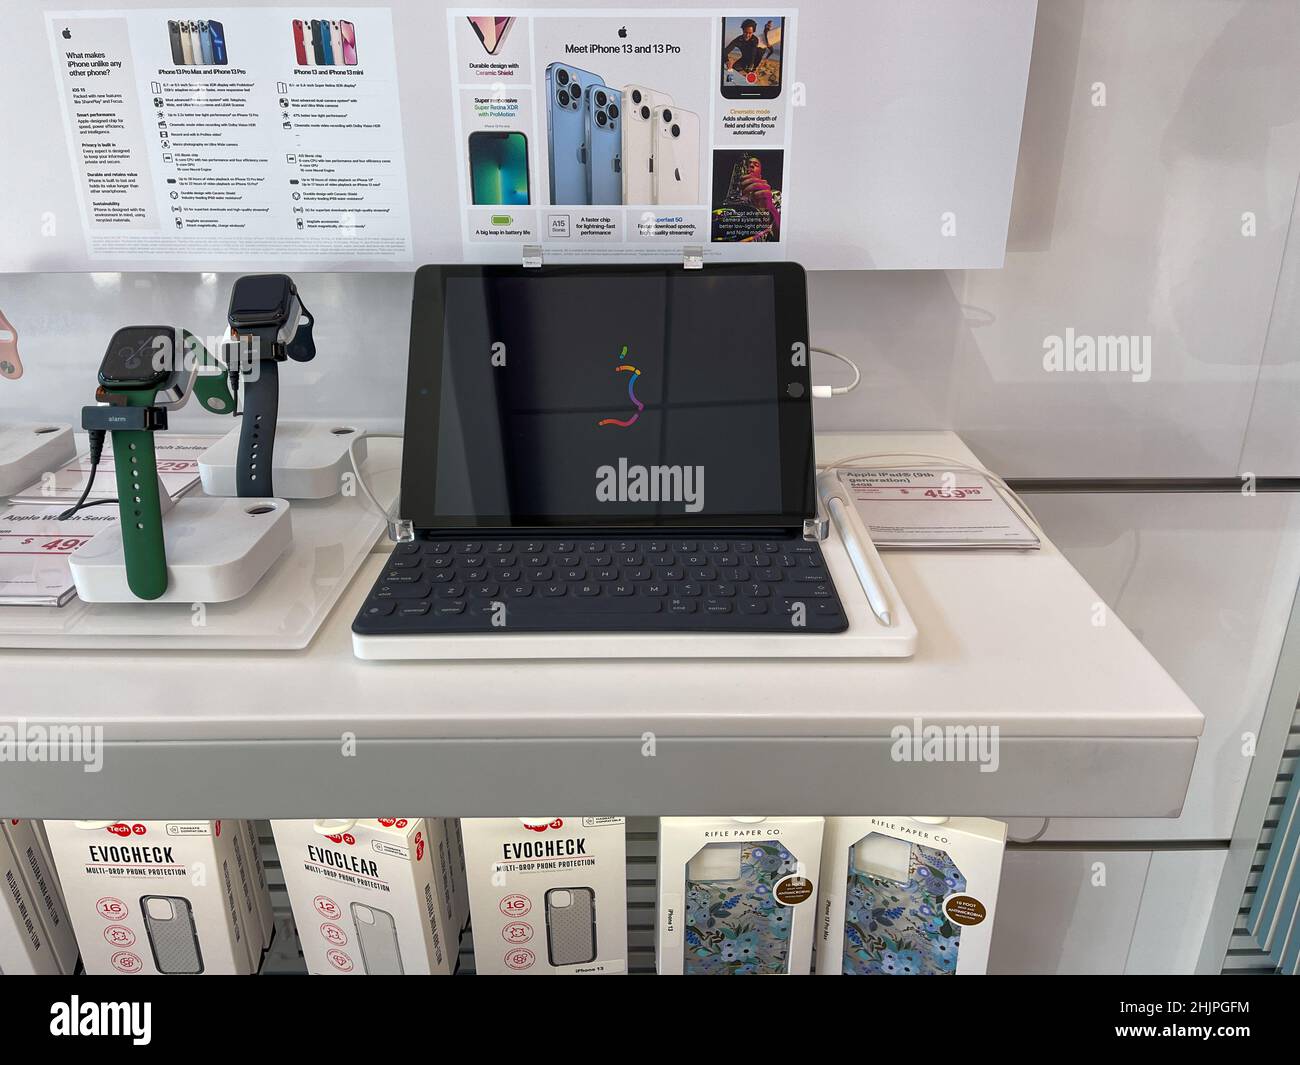 Orlando, FL USA - October 19, 2021: A display of a powerful Apple iPad Pro at a T Mobile Store in Orlando, Florida Stock Photo